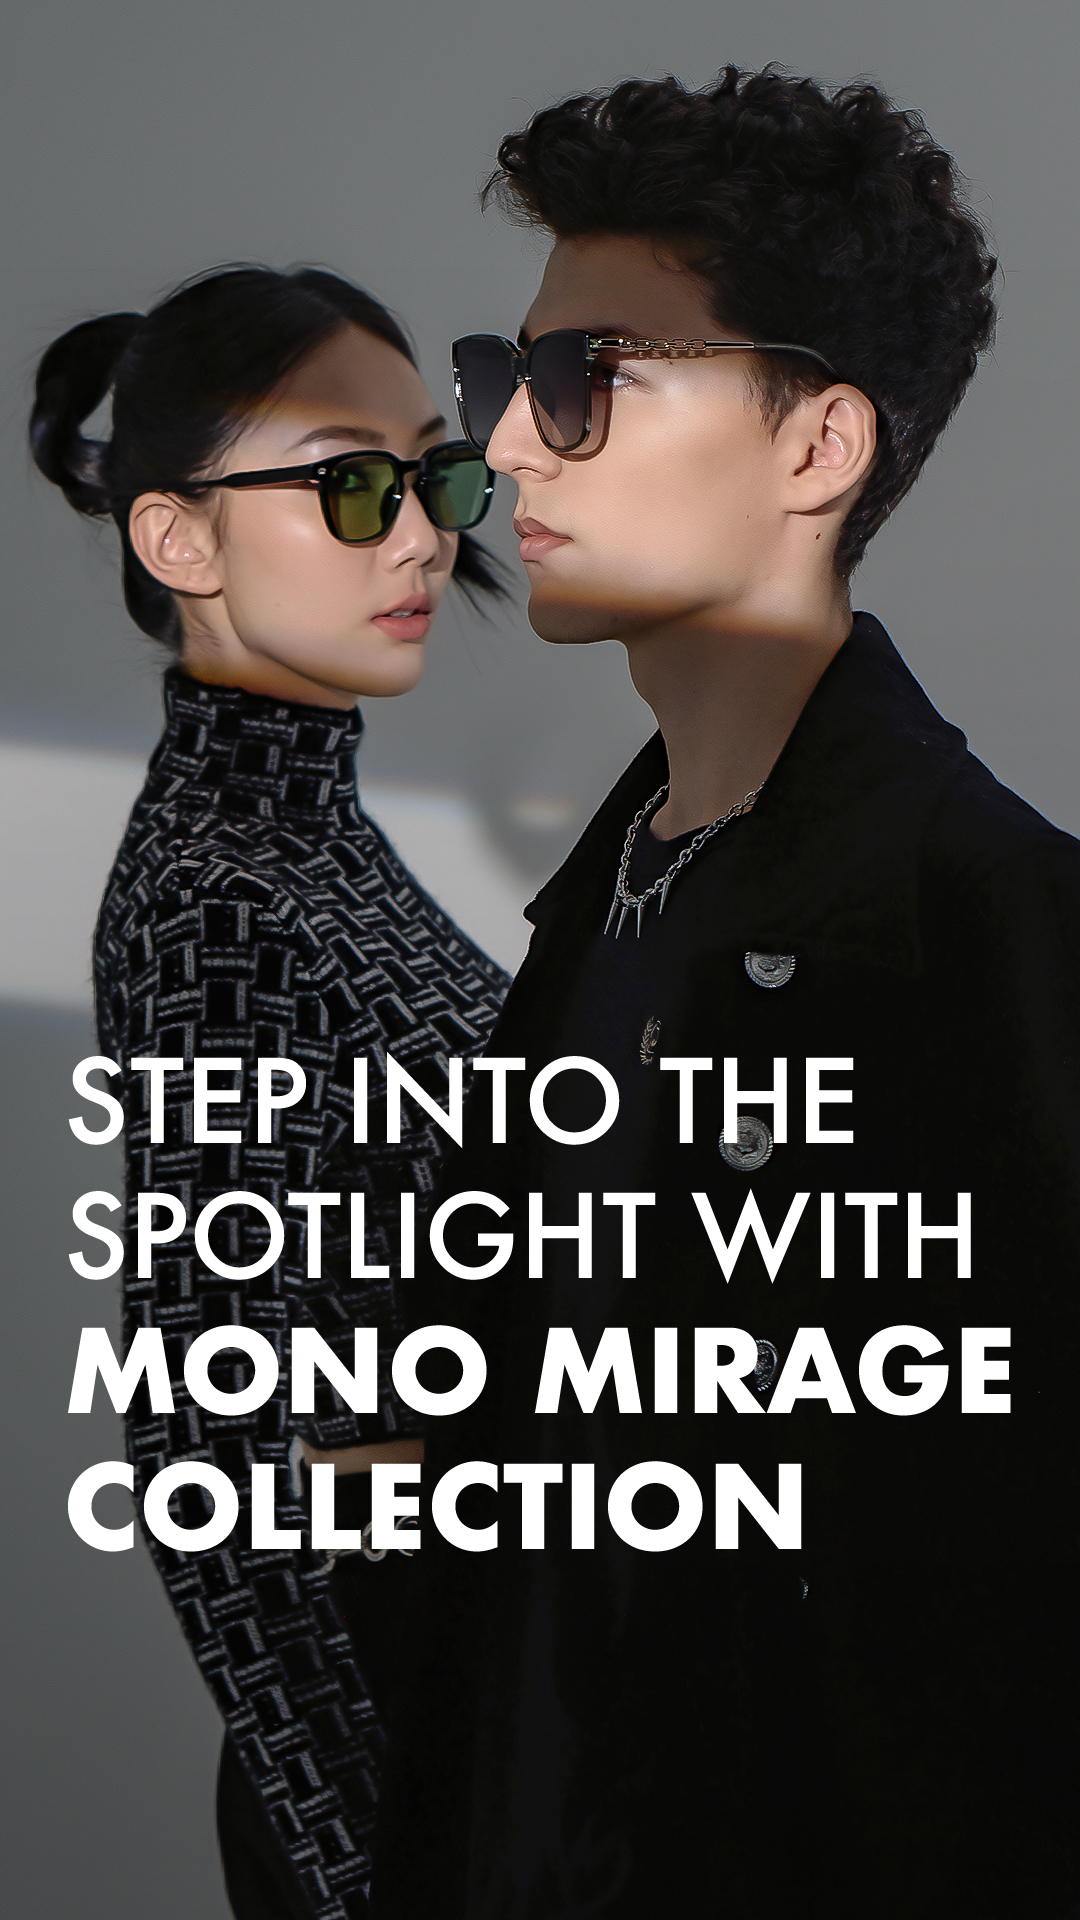 Step into the spotlight with Mono Mirage Collection